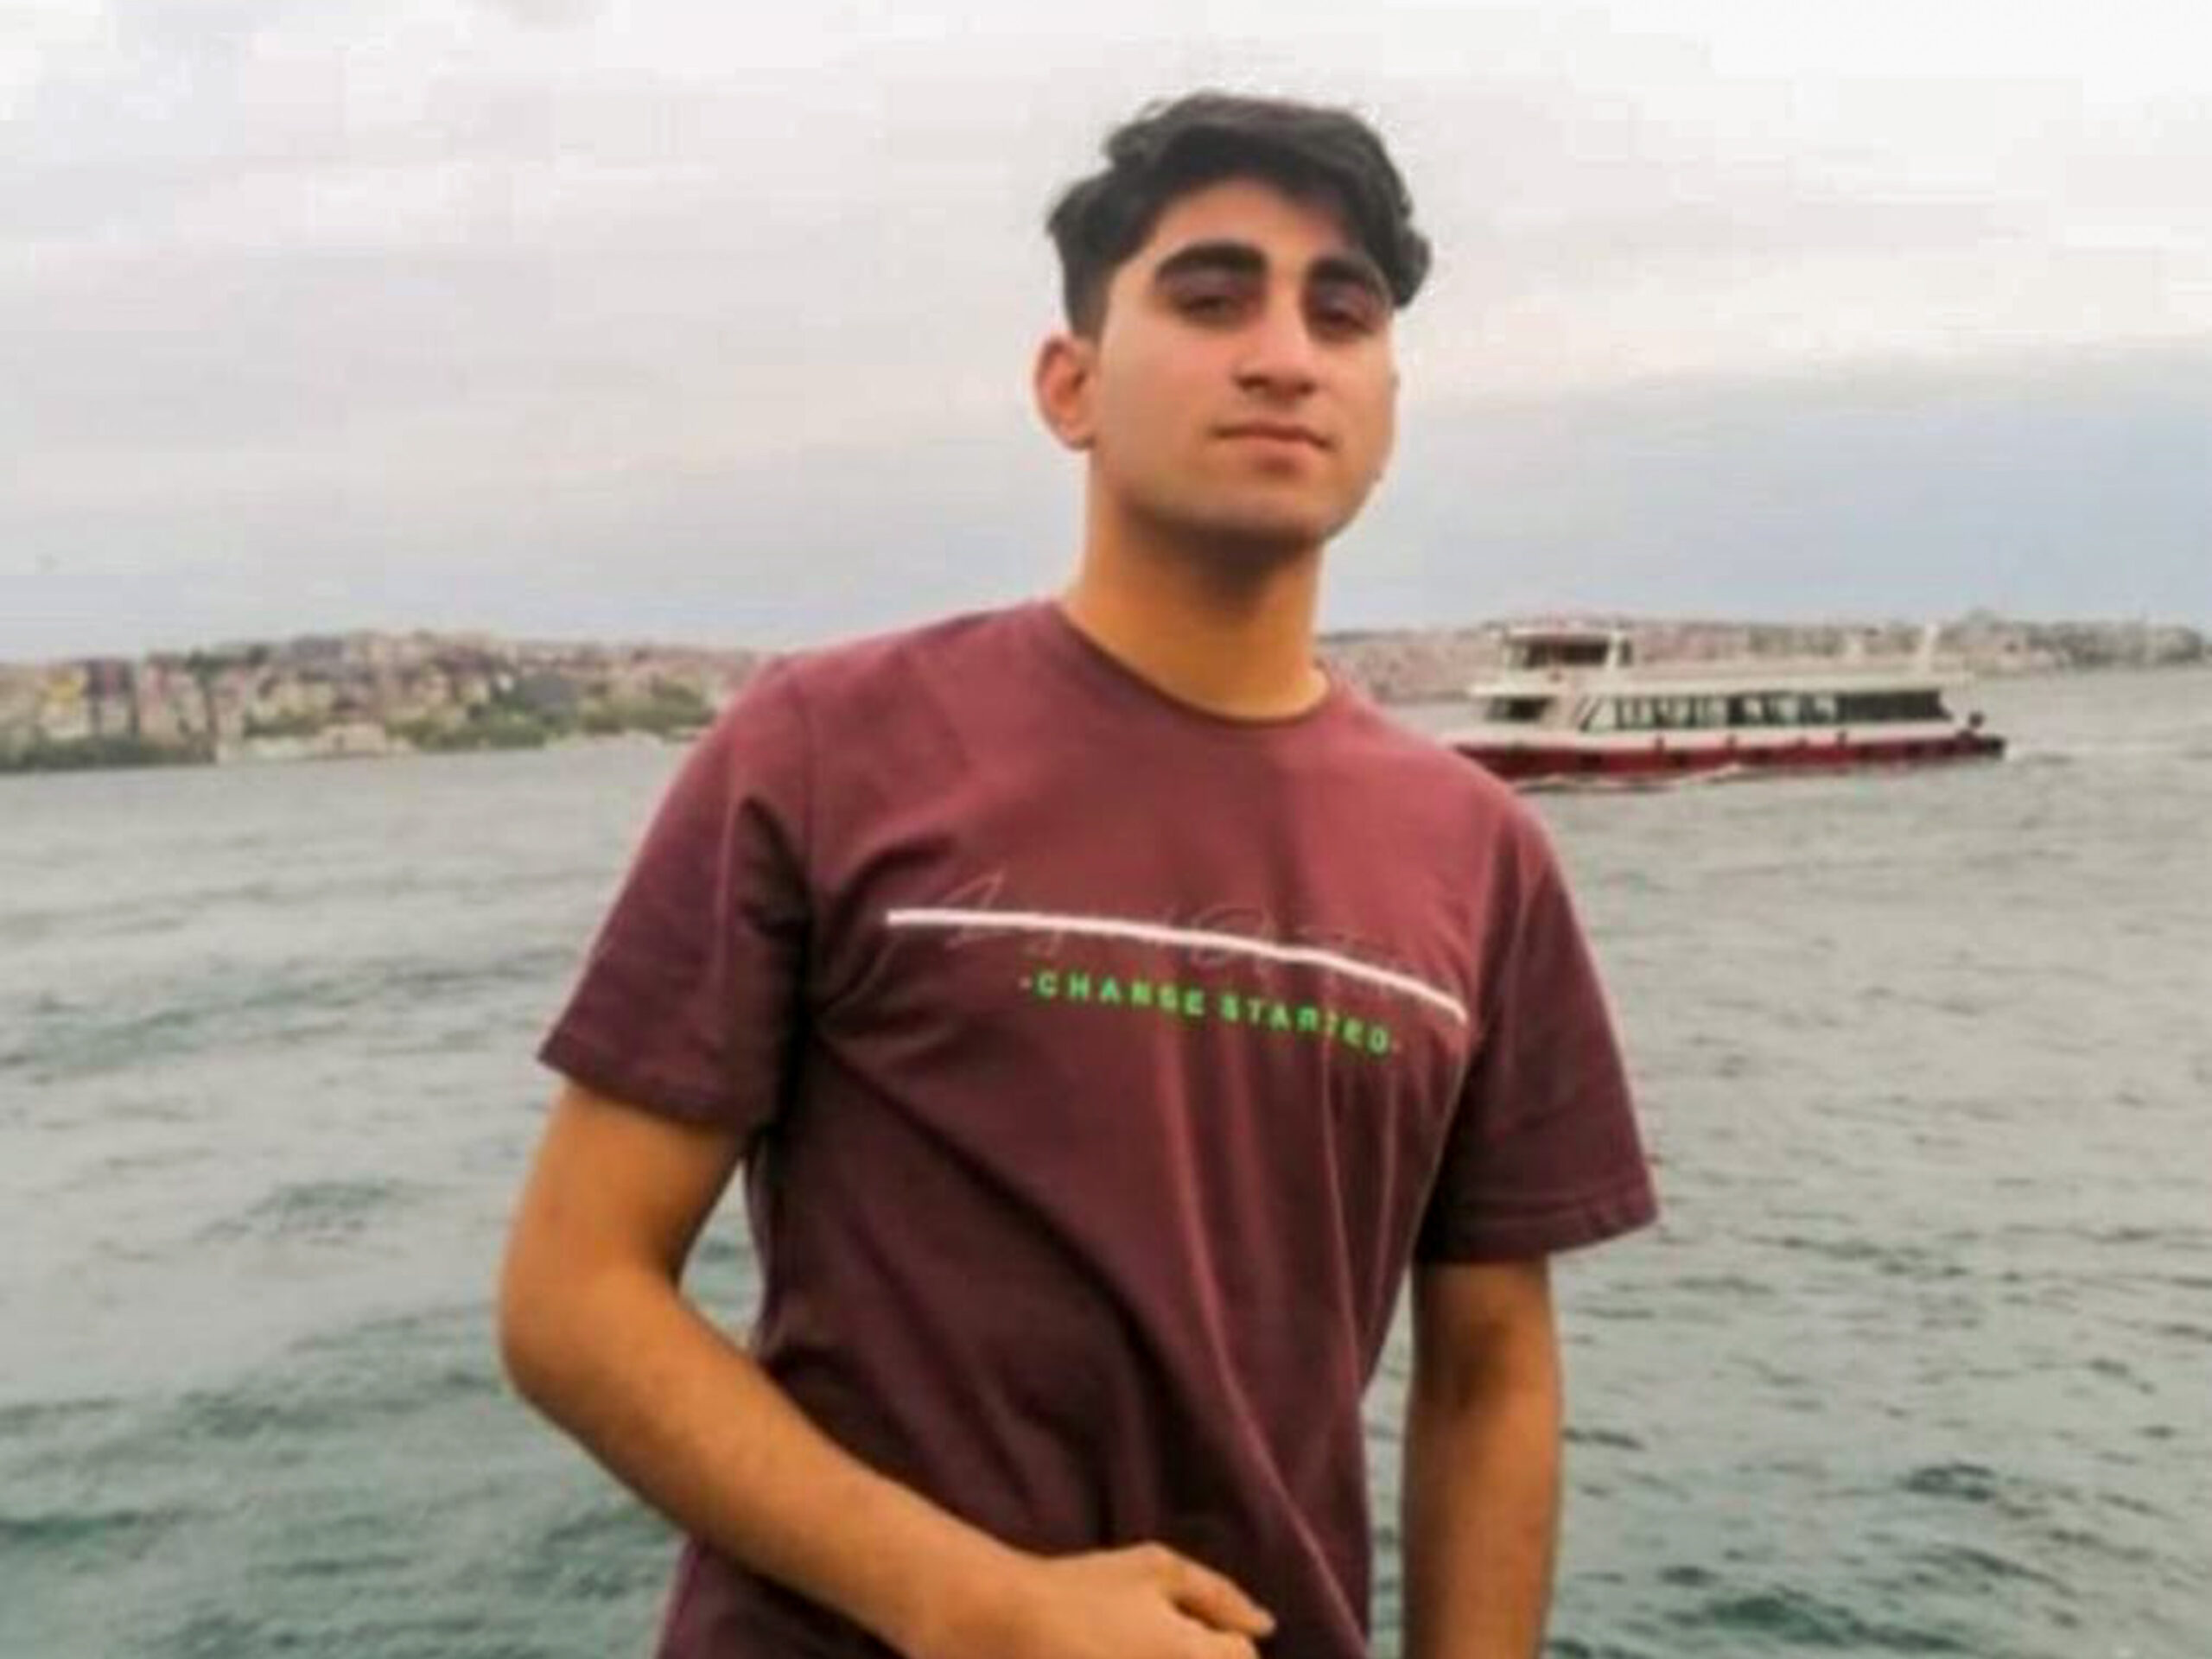 A photo of Ajmal Khan on his way to Western Europe to find work, taken by a travel companion and sent by Khan to his family in Afghanistan via WhatsApp. The 17-year-old drowned when crossing the Drina River in Tuzla, the third largest city in Bosnia-Herzegovina — part of a common route for migrants as they headed toward wealthier European countries.